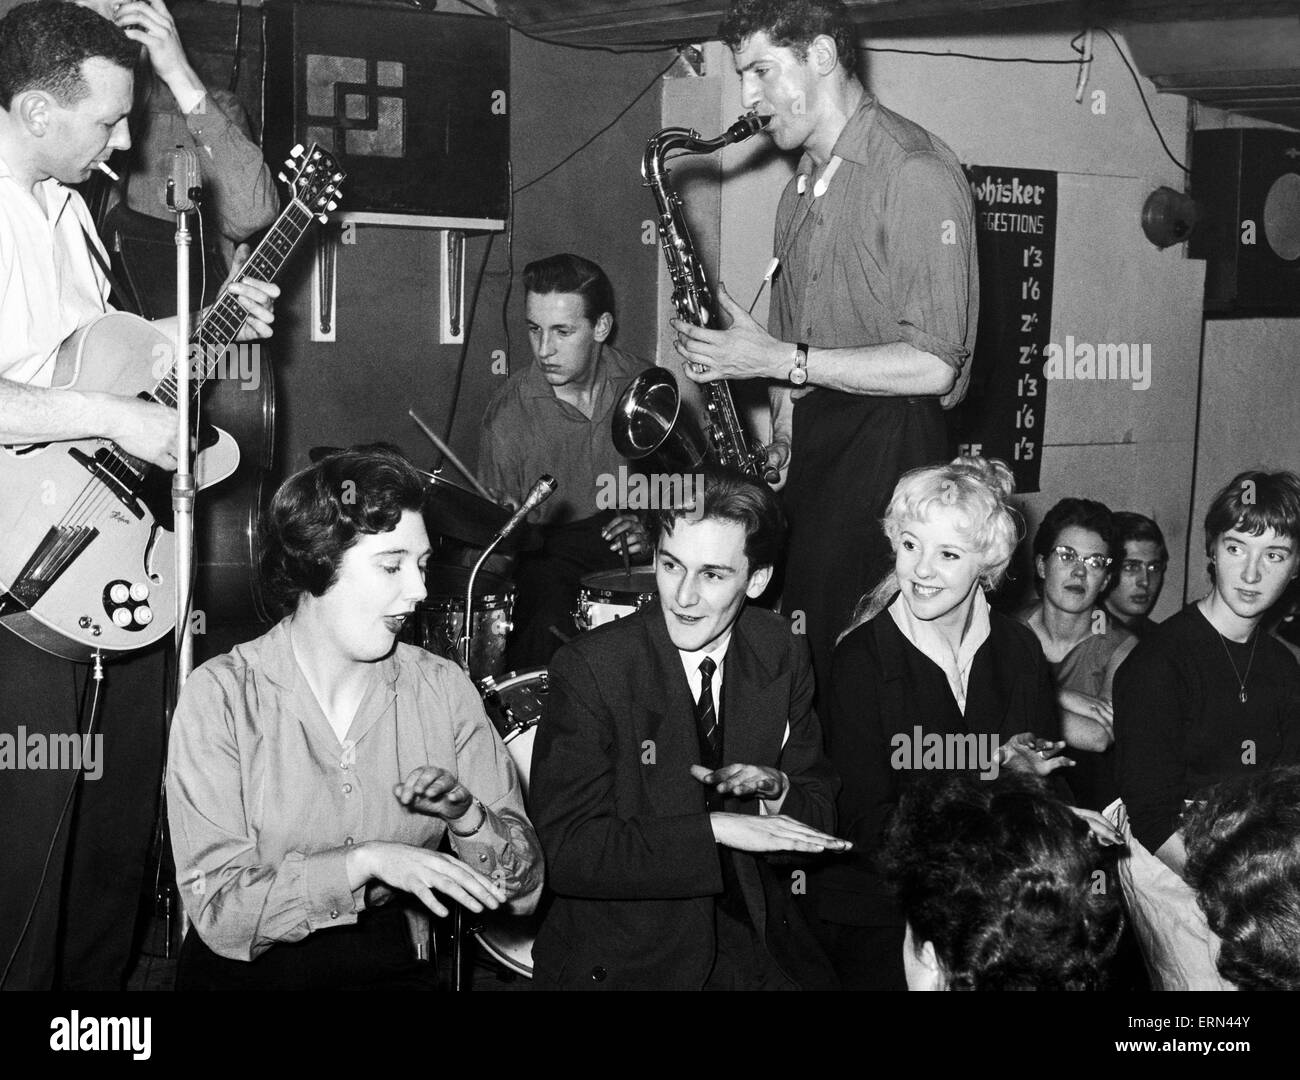 The Rock and Roll restaurant. People Hand Jive in front of the band. 27th November 1956. Stock Photo